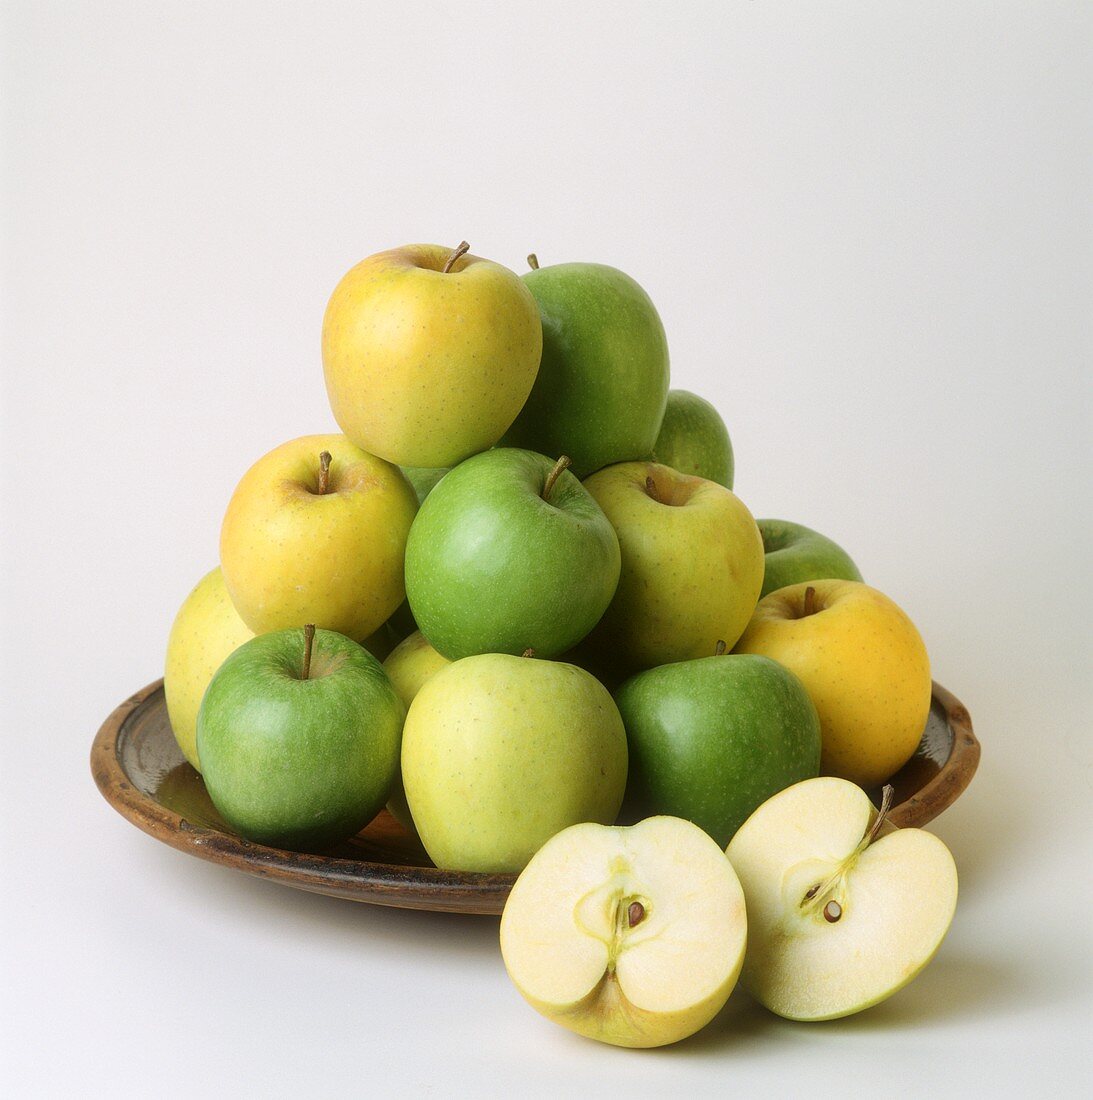 Apples in a bowl (Golden Delicious and Granny Smith)